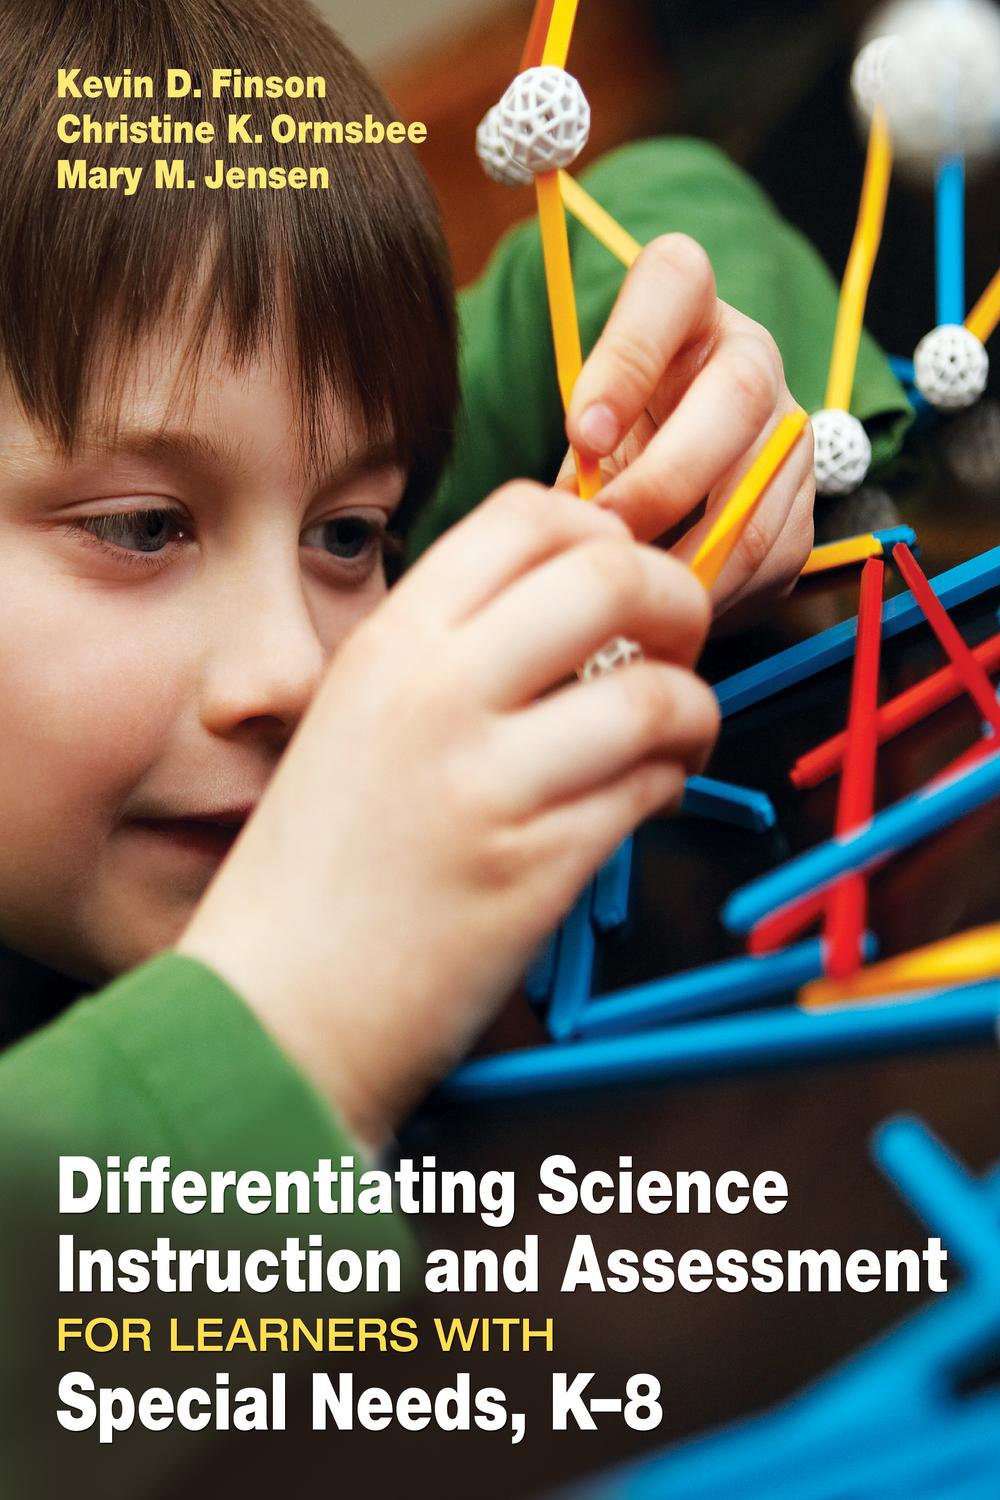 Differentiating Science Instruction and Assessment for Learners With Special Needs, K–8 - Kevin D. Finson, Christine K. Ormsbee, Mary M. Jensen